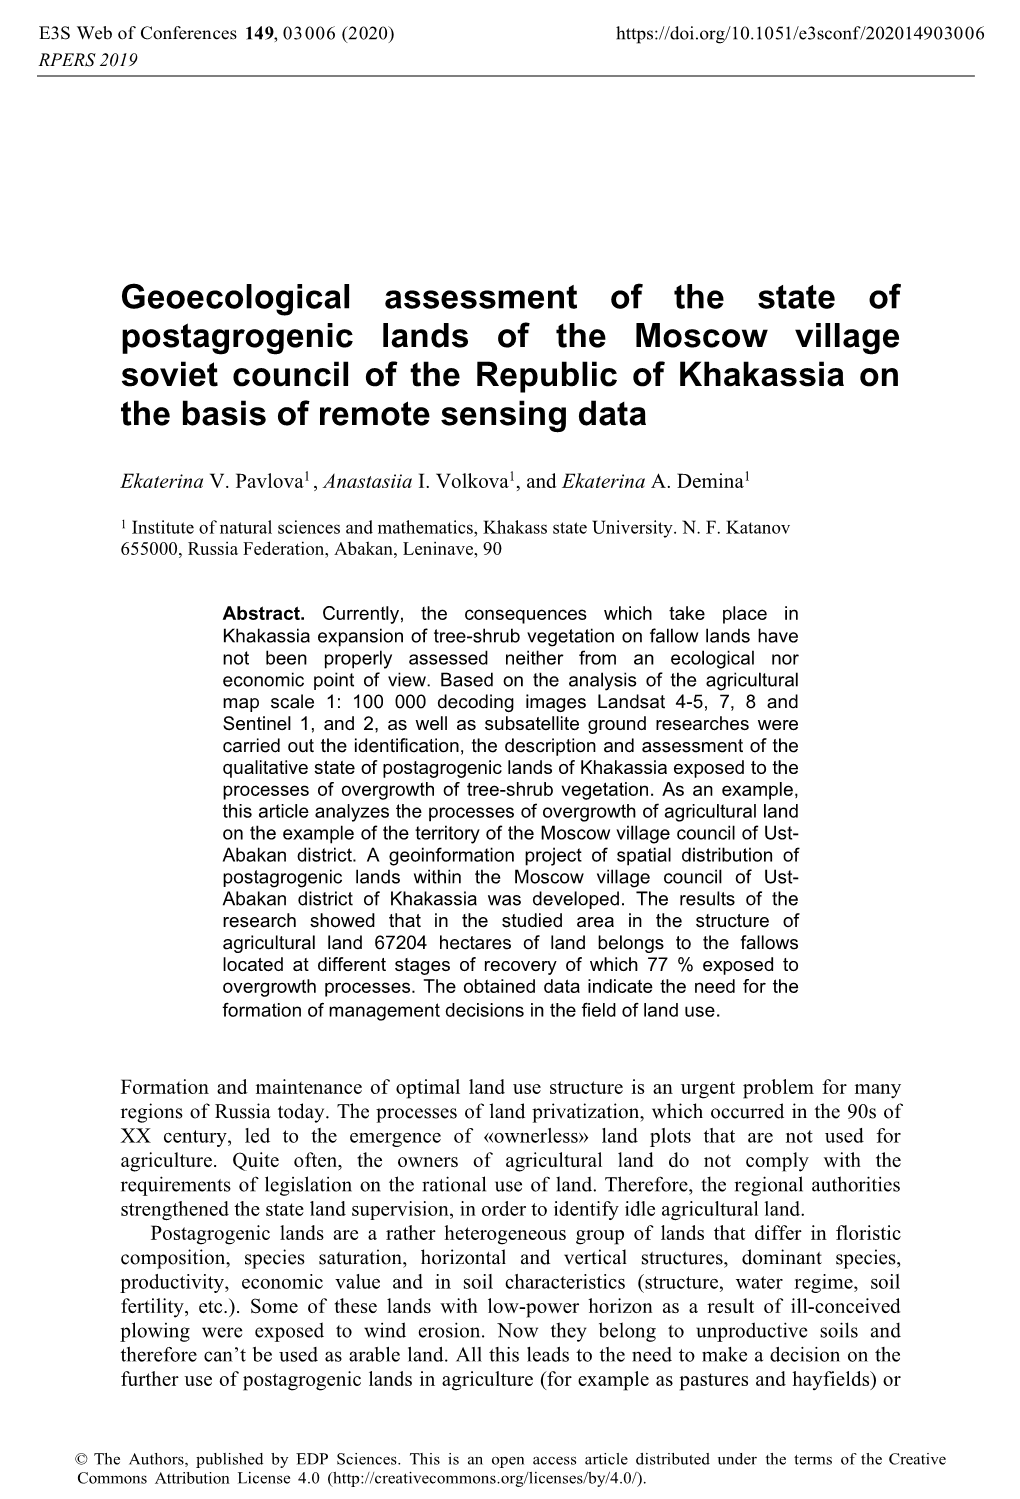 Geoecological Assessment of the State of Postagrogenic Lands of the Moscow Village Soviet Council of the Republic of Khakassia on the Basis of Remote Sensing Data